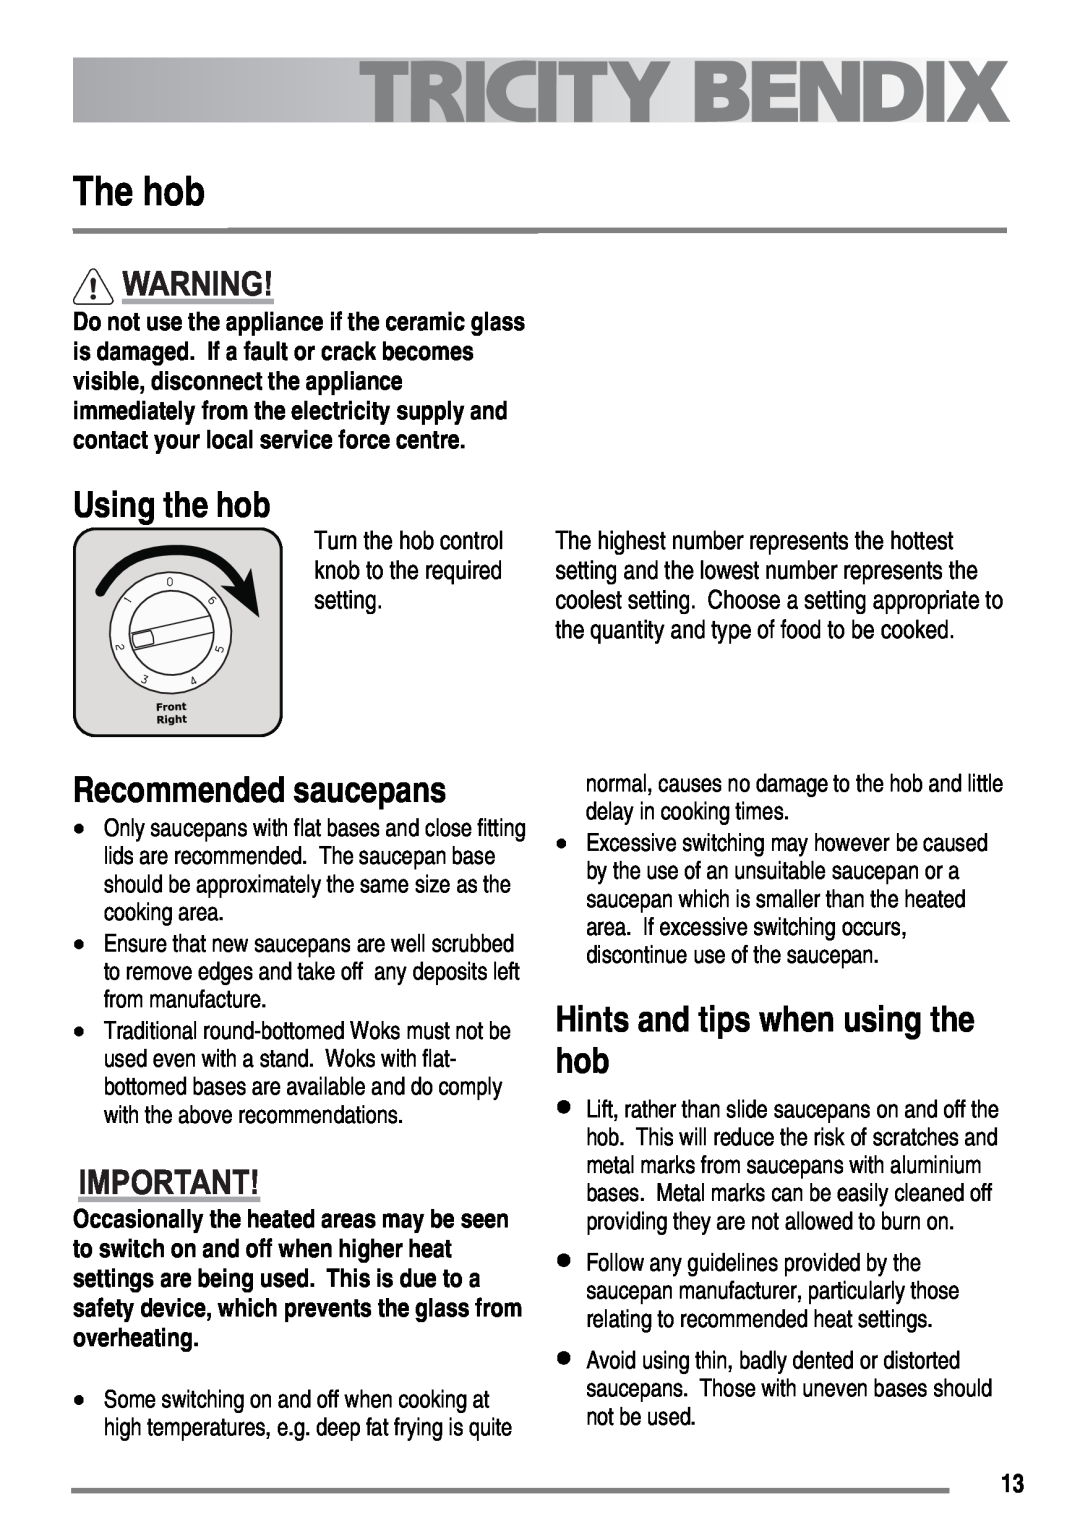 Tricity Bendix SE558 user manual The hob, Using the hob, Recommended saucepans, Hints and tips when using the hob 